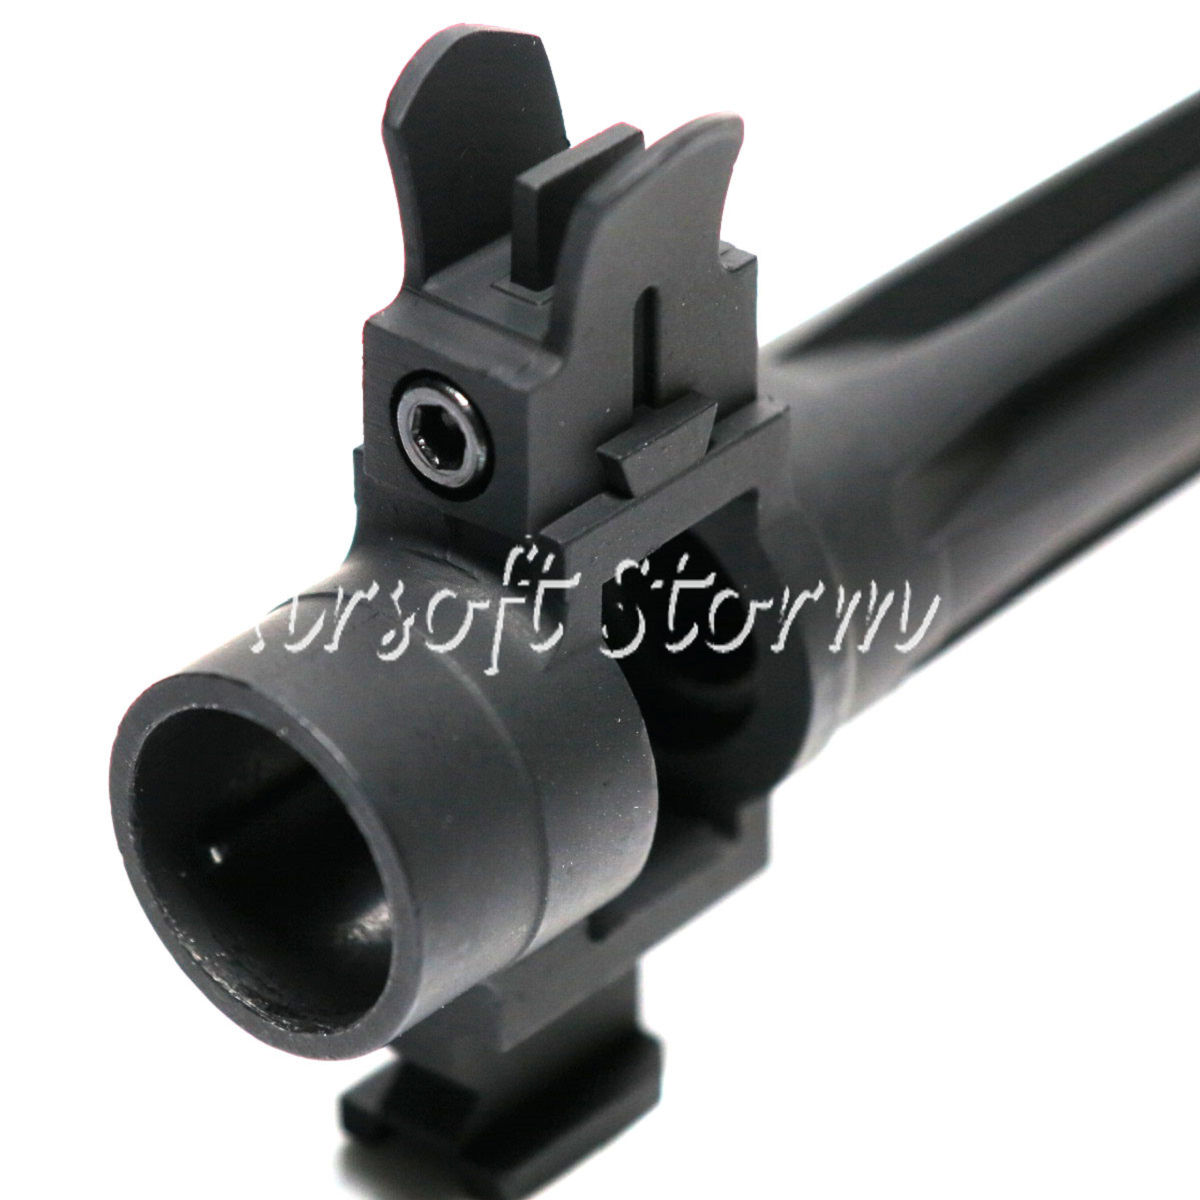 Shooting Gear CYMA Metal Flash Hider & Front Sight Set for M14 CM032 (HY-130)